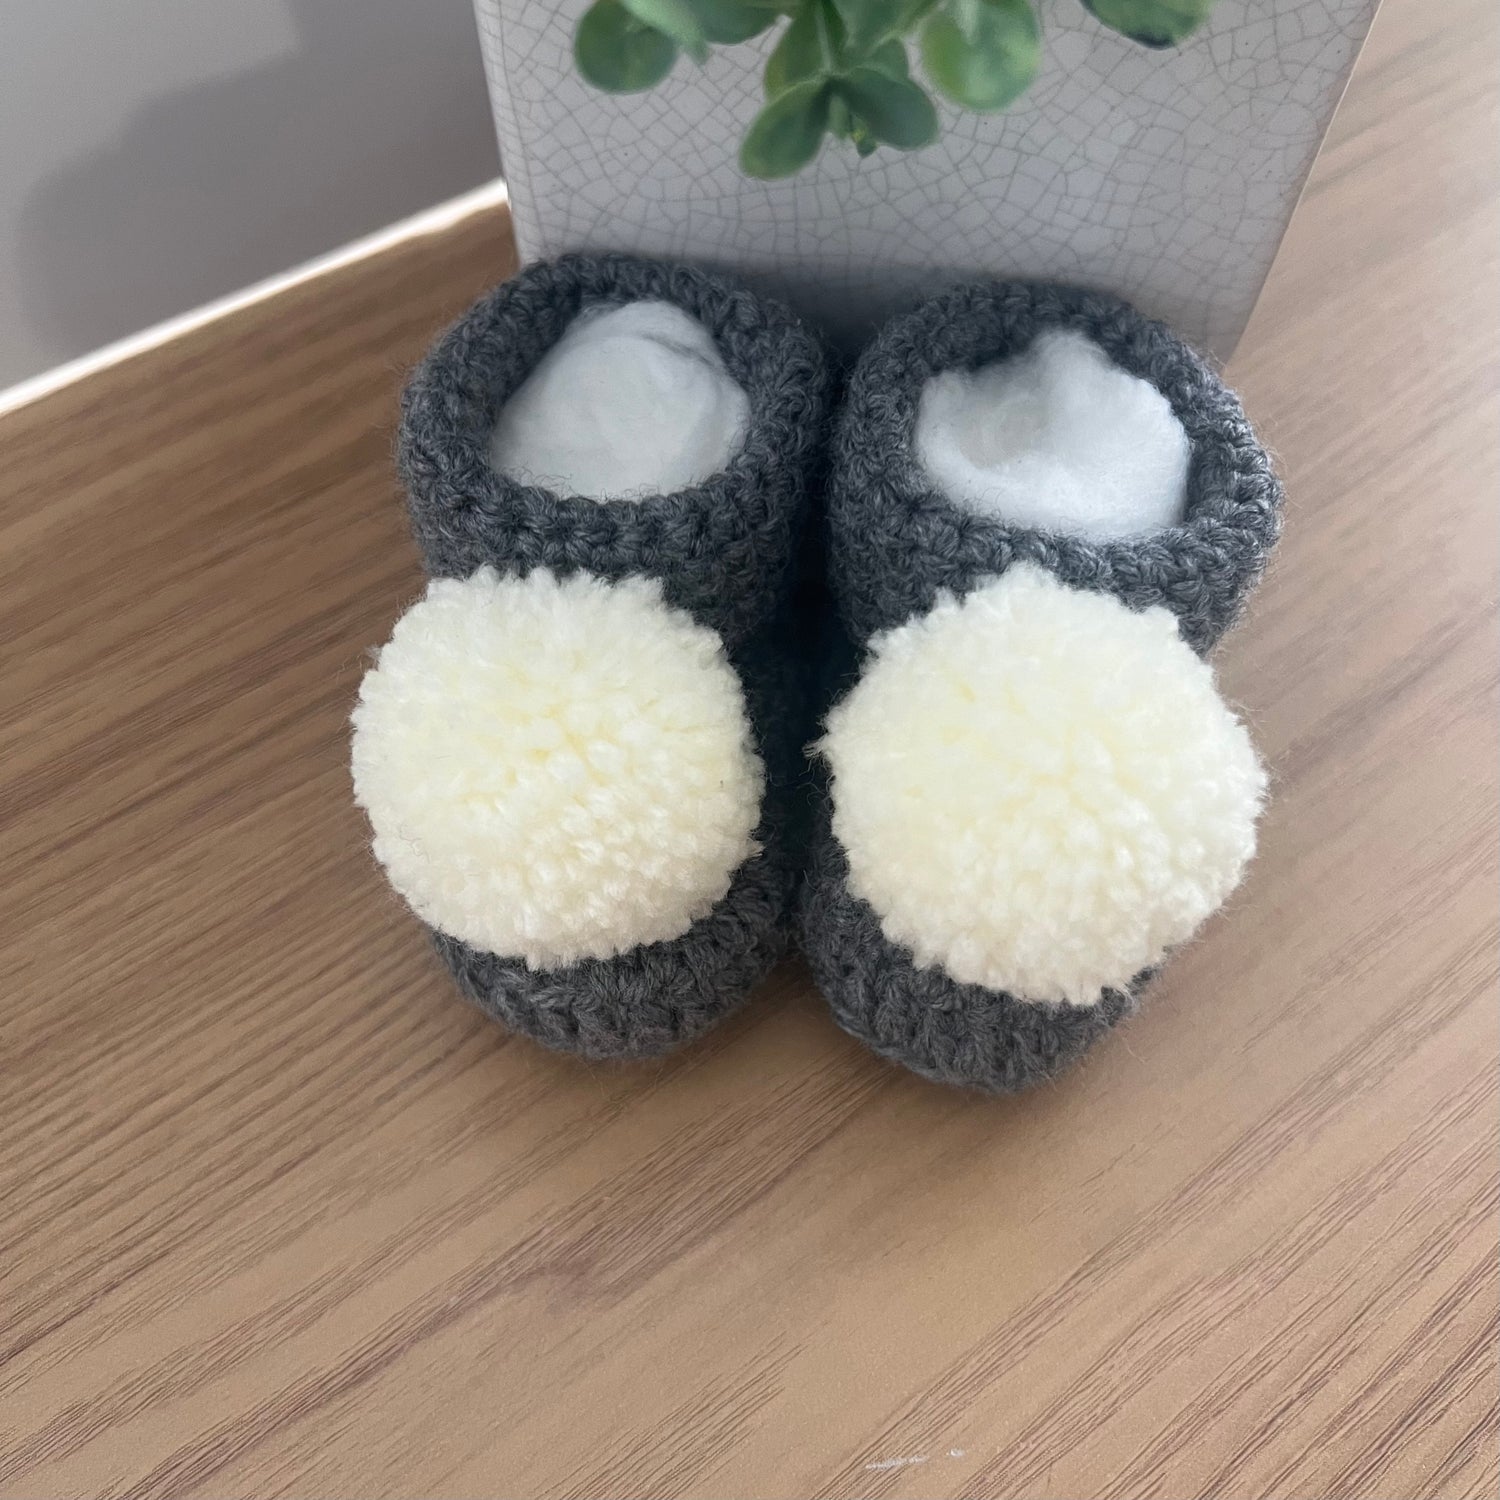 Crocheted baby bootees in grey and white with pom poms